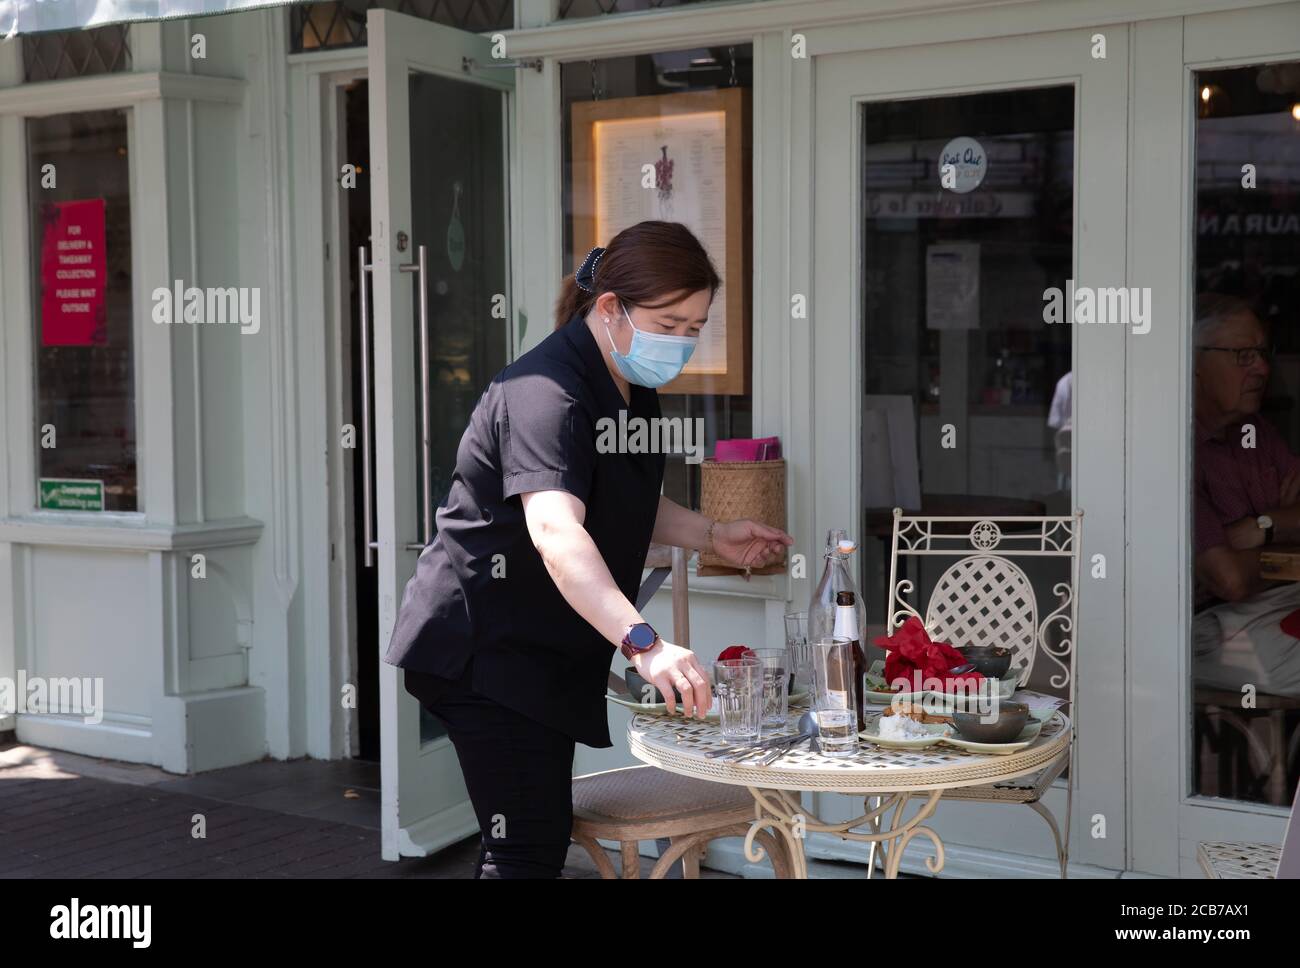 Sevenoaks, Kent, 11th August 2020, A waitress clears a table in Sevenoaks, Kent as people The forecast is for 32C sunny with light winds and is to continue with high temperatures until Thursday when thundery showers arrive. Credit: Keith Larby/Alamy Live News Stock Photo